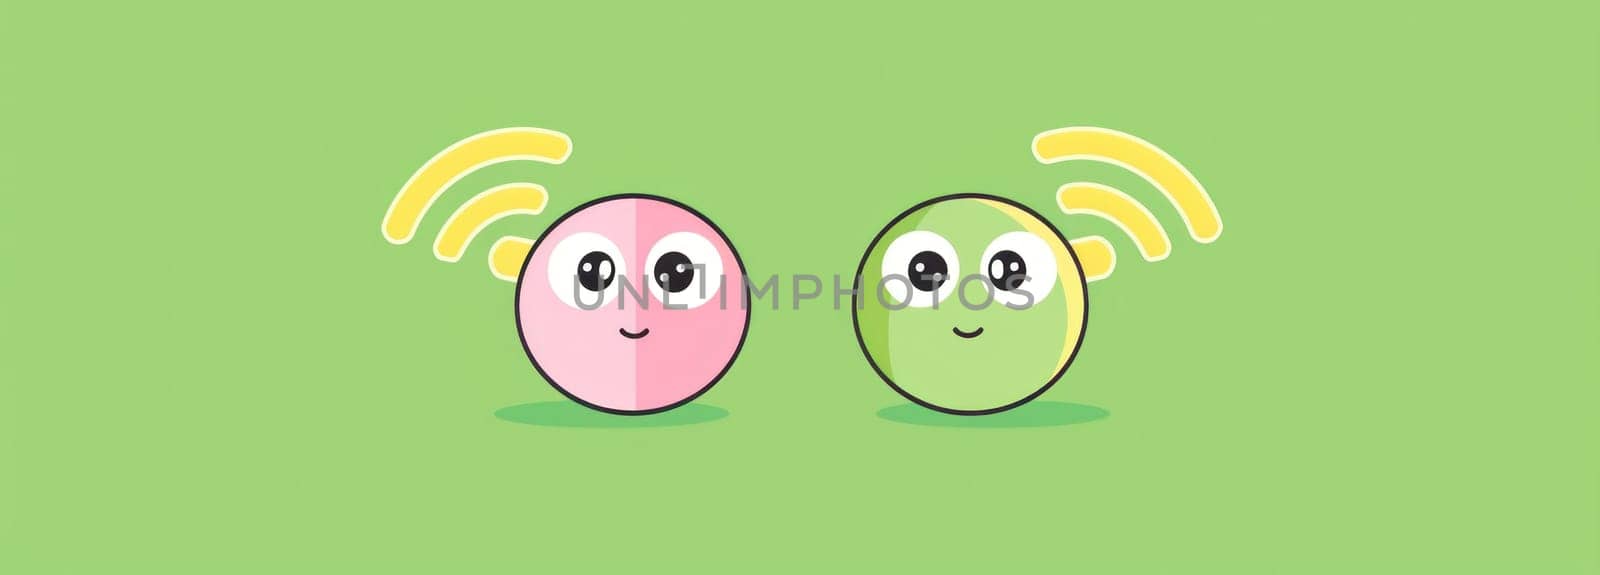 Cheerful easter eggs with colorful faces on green and pink backgrounds for holiday celebrations